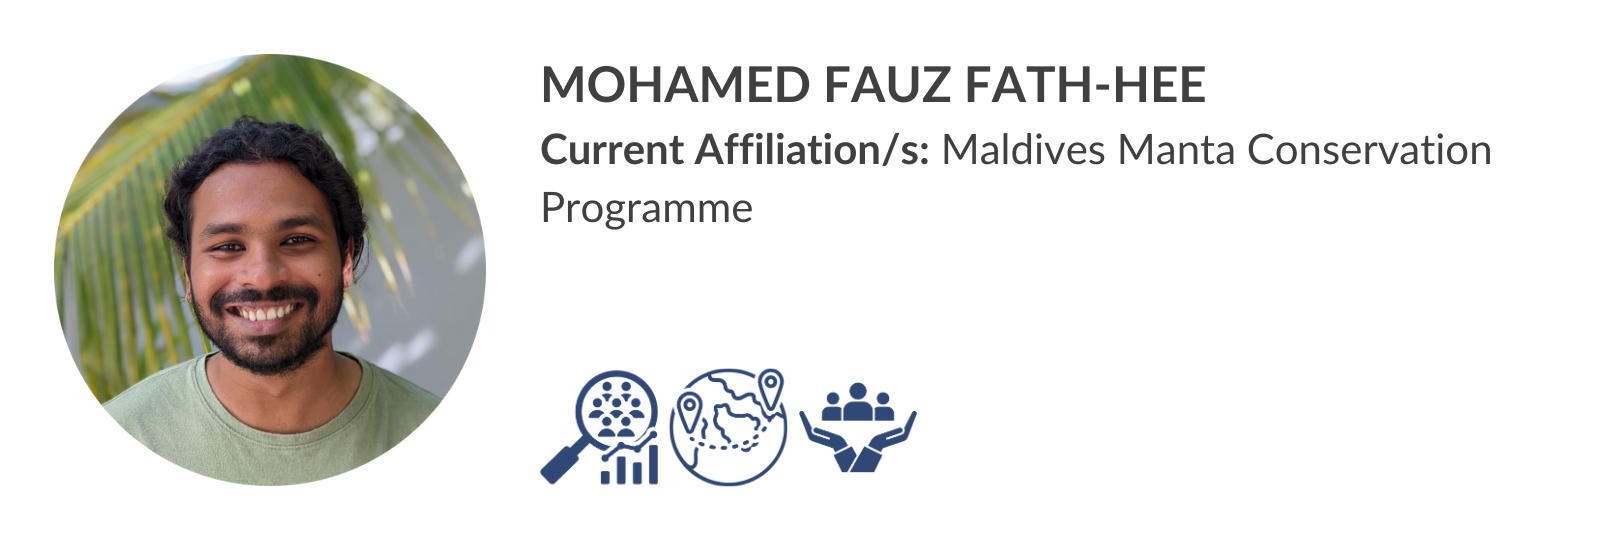 Mohamed Fauz Fath-Hee.png